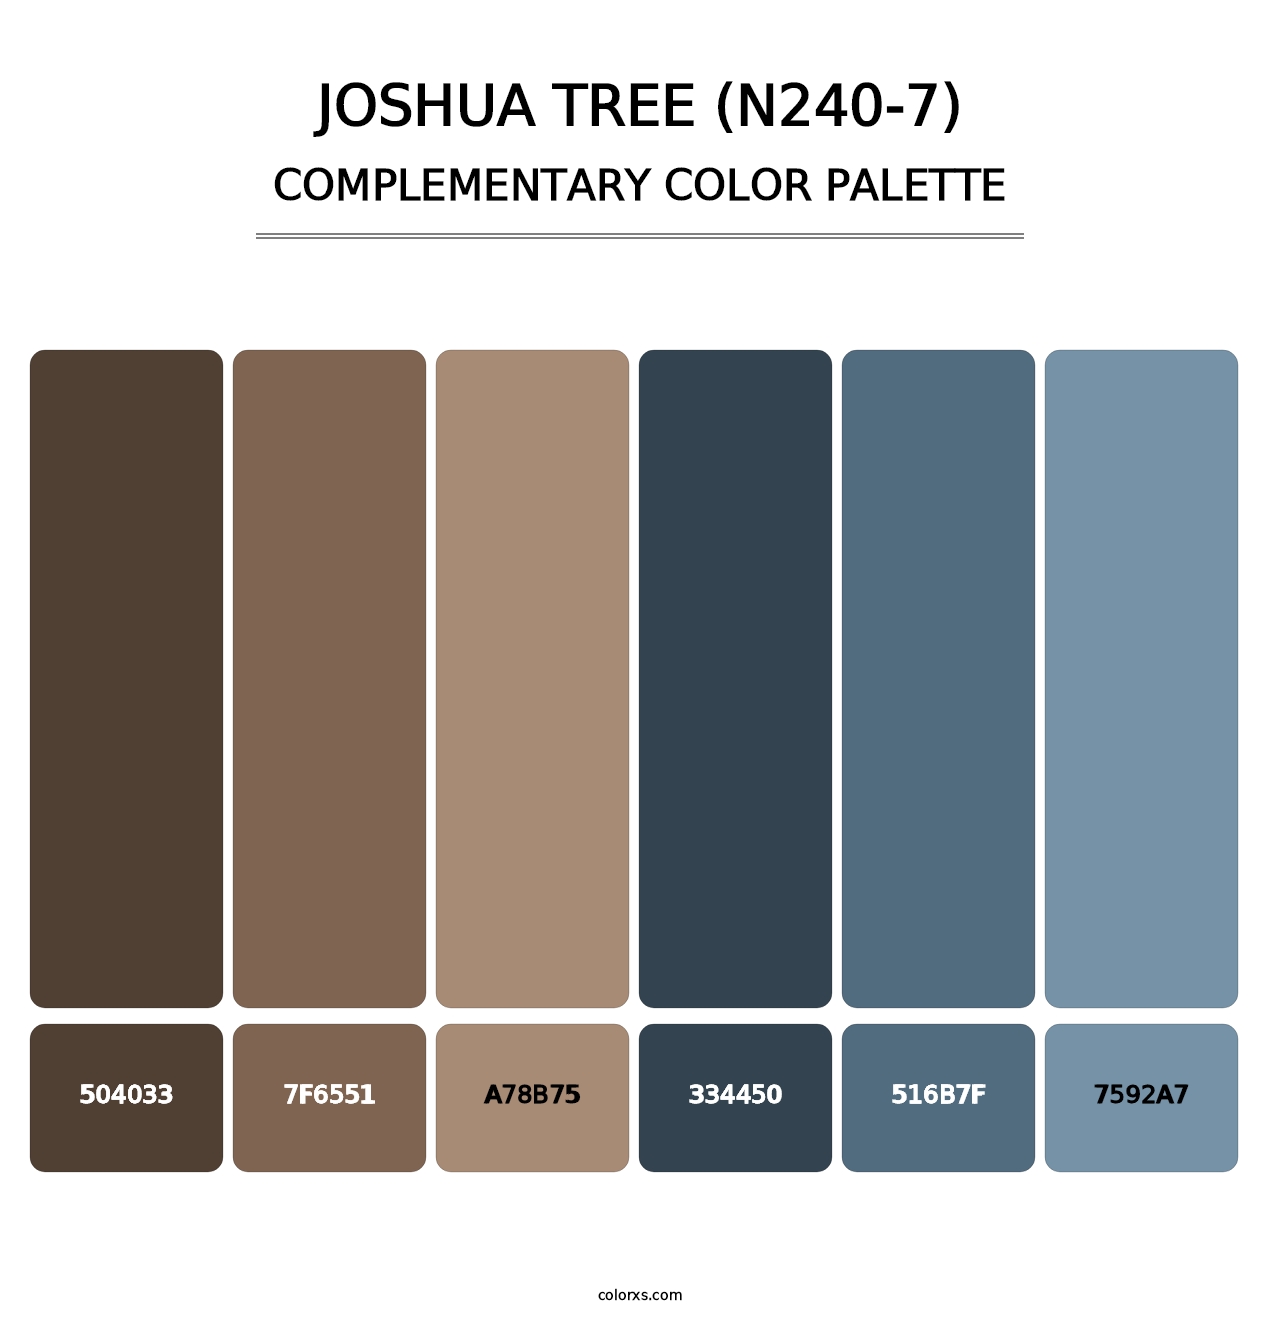 Joshua Tree (N240-7) - Complementary Color Palette